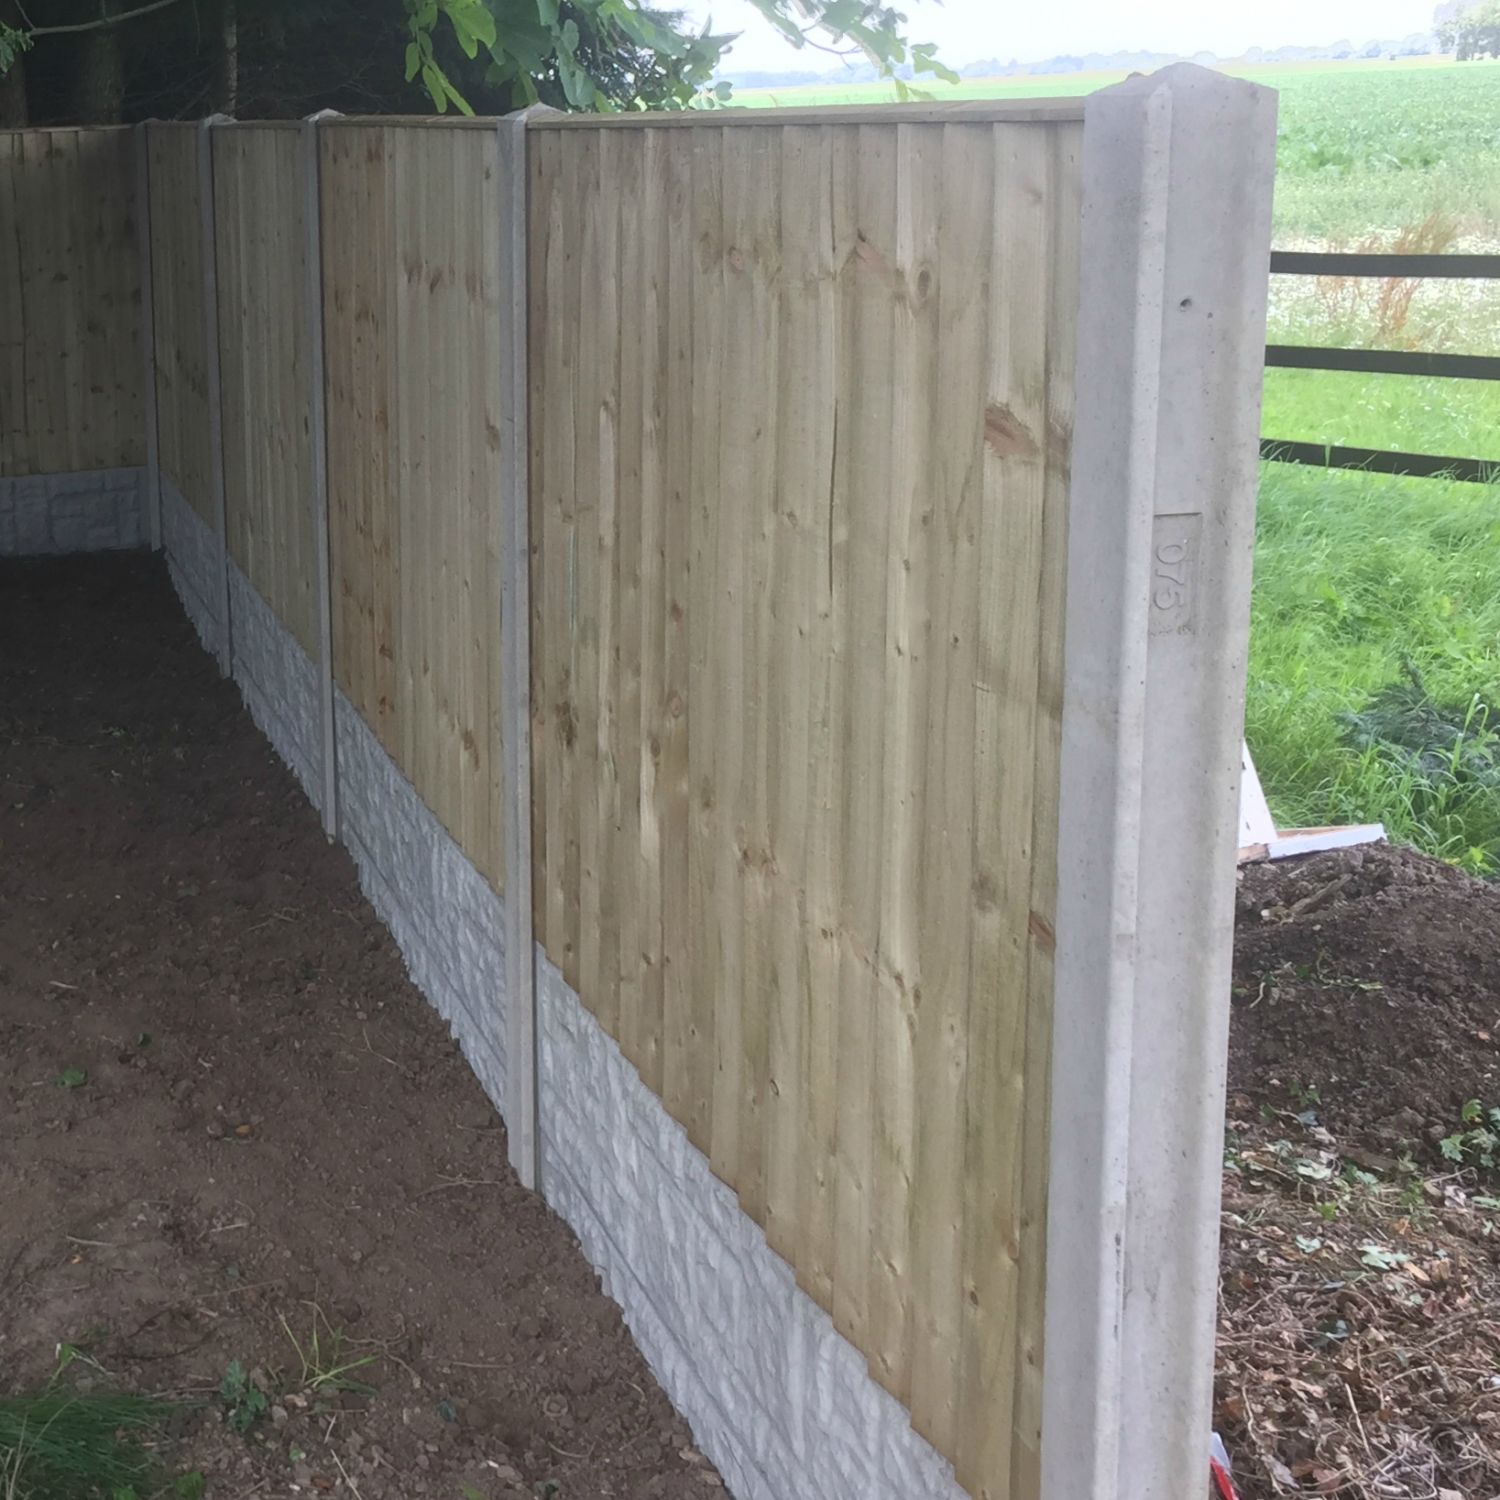 Concrete Slot In Fence Posts